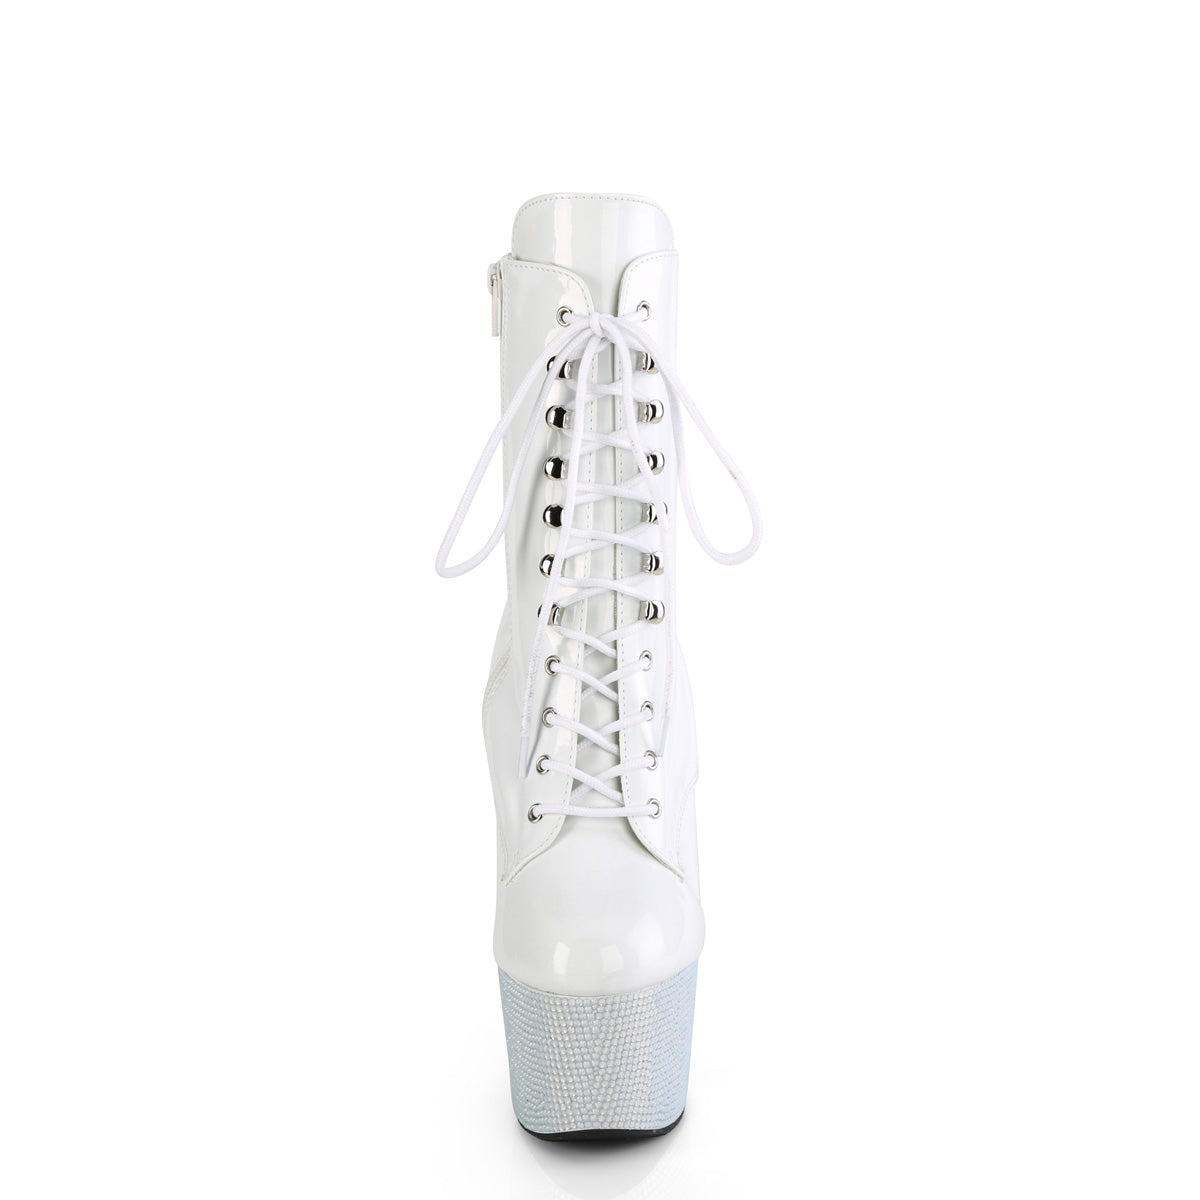 BEJEWELED-1020-7 Pleaser White Holo Patent/White Rhinestones Platform Shoes [Sexy Ankle Boots]